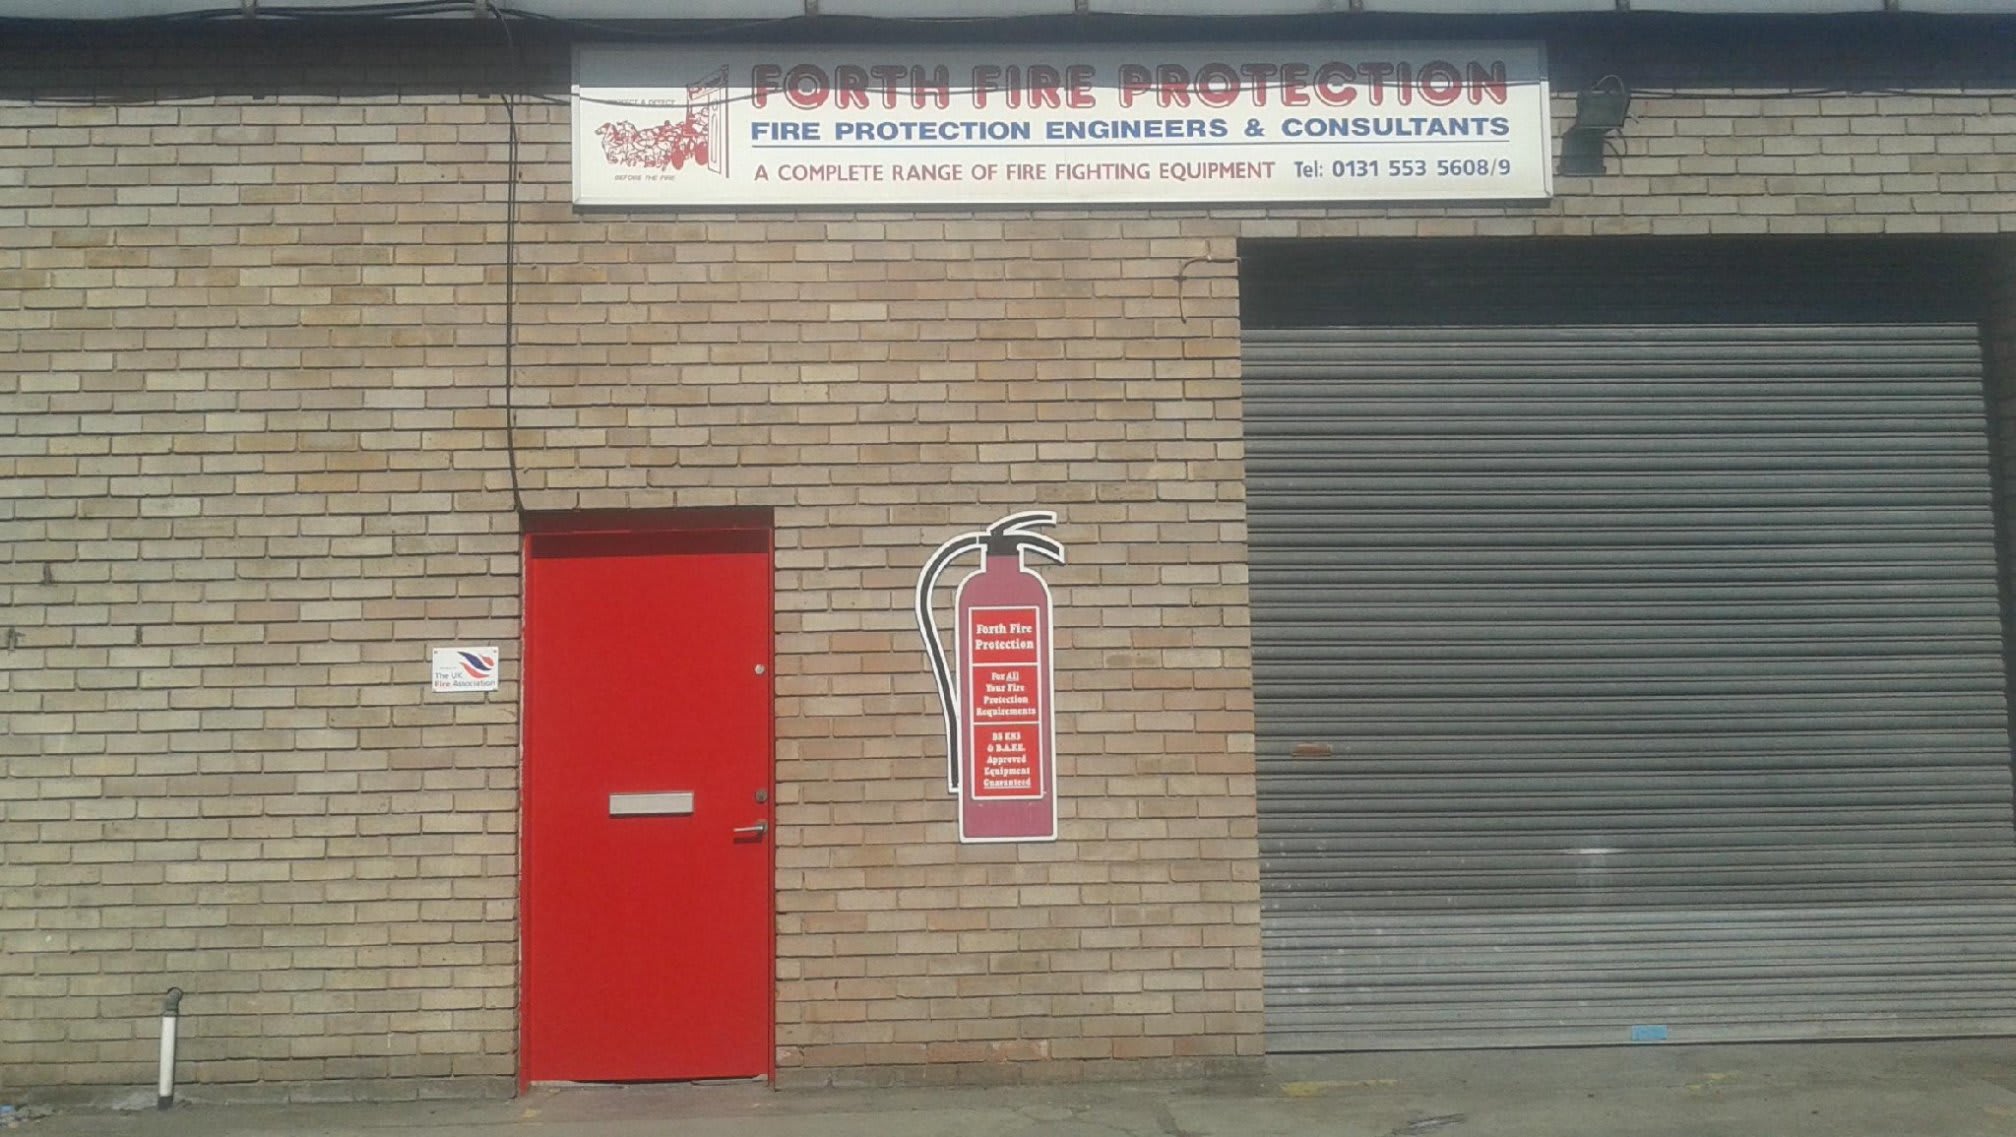 Images Forth Fire Protection